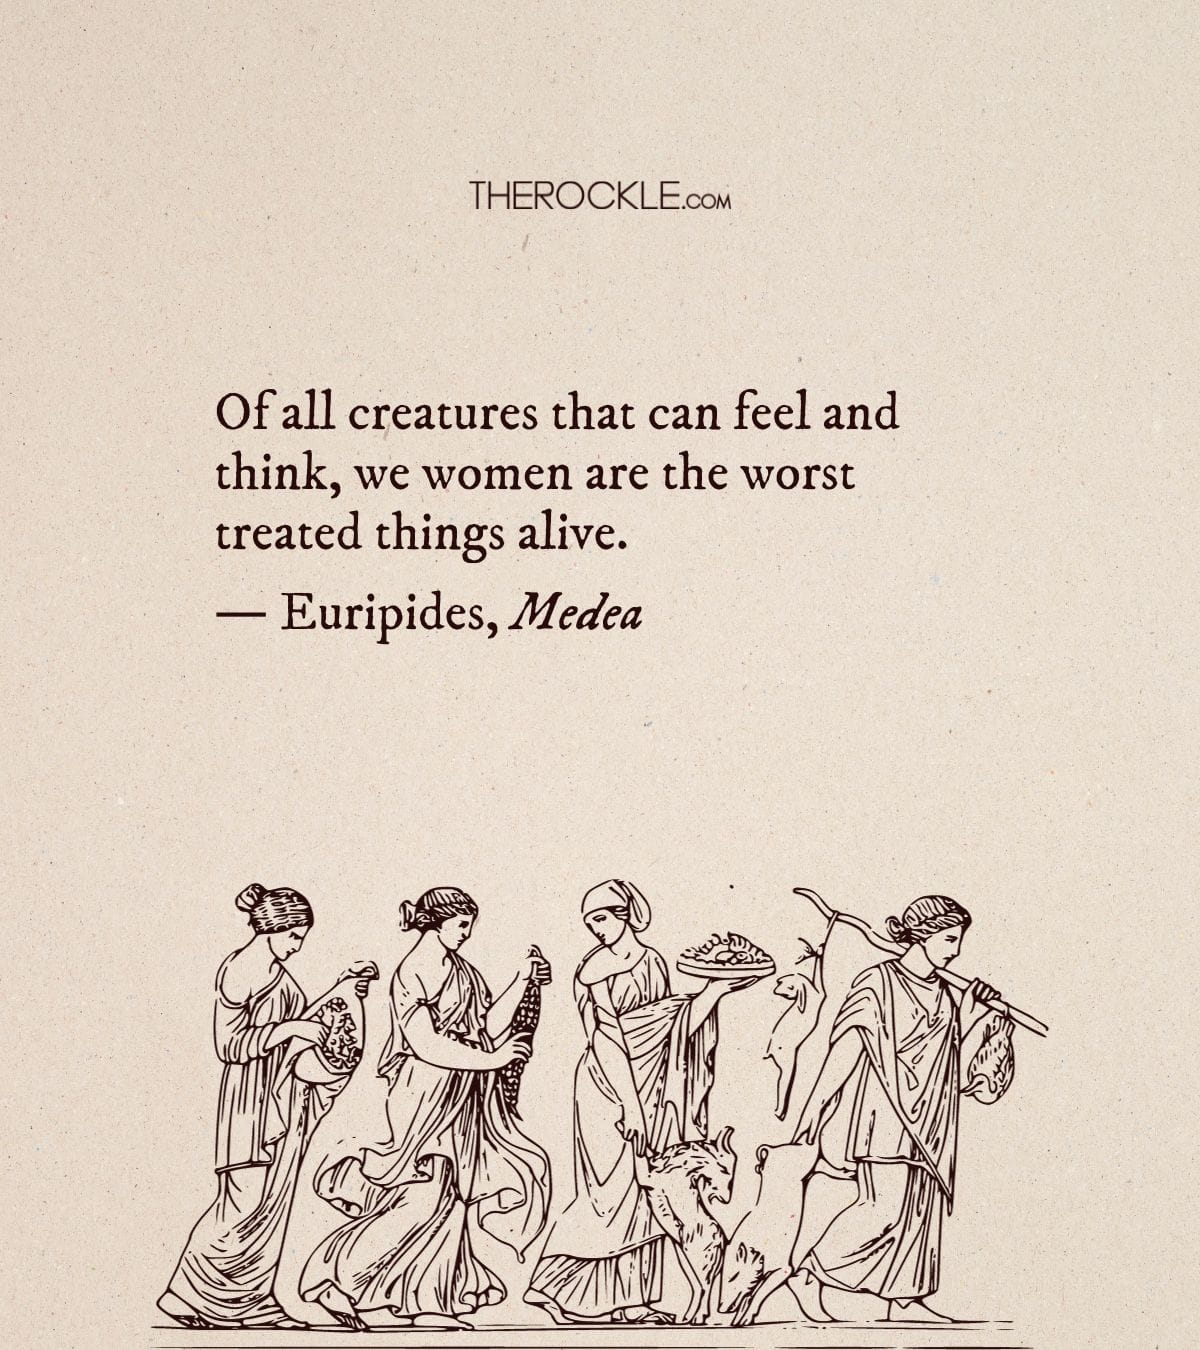 Quote from Euripides' Medea about the mistreatment of women in society